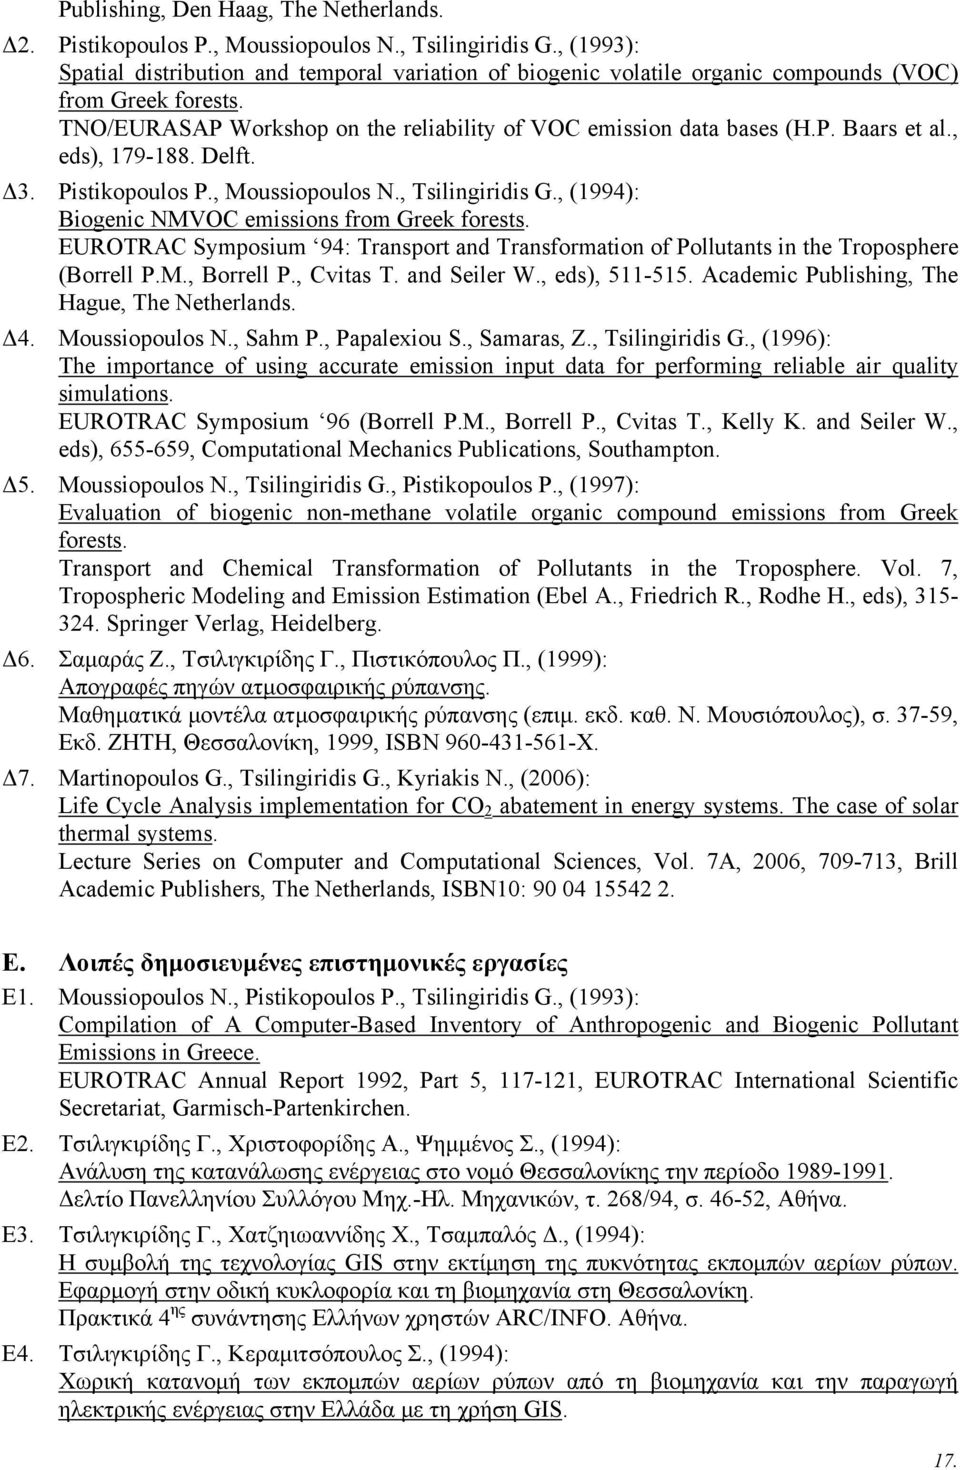 , eds), 179-188. Delft. Δ3. Pistikopoulos P., Moussiopoulos N., Tsilingiridis G., (1994): Biogenic NMVOC emissions from Greek forests.